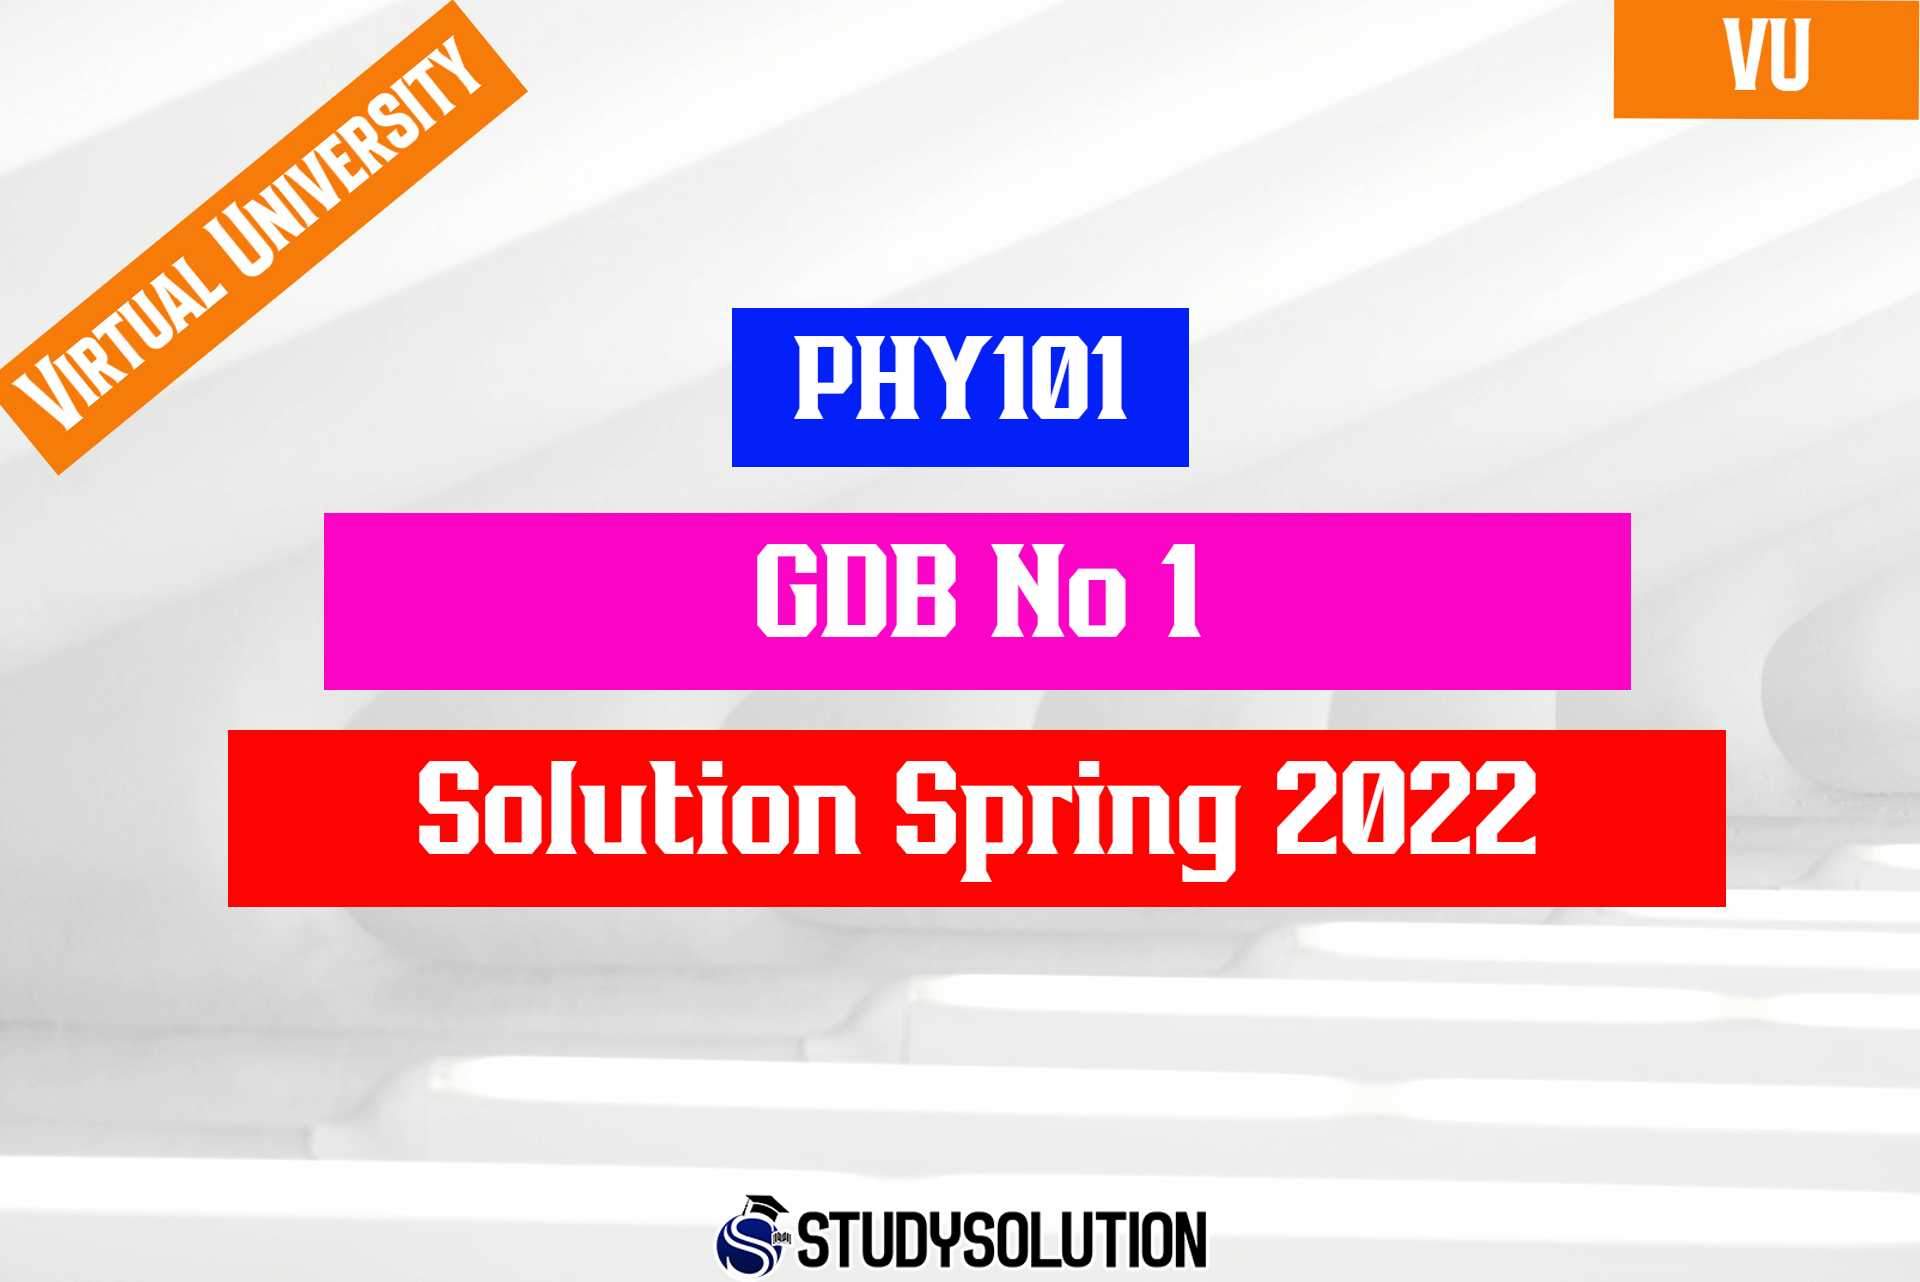 PHY101 GDB No 1 Solution Spring 2022